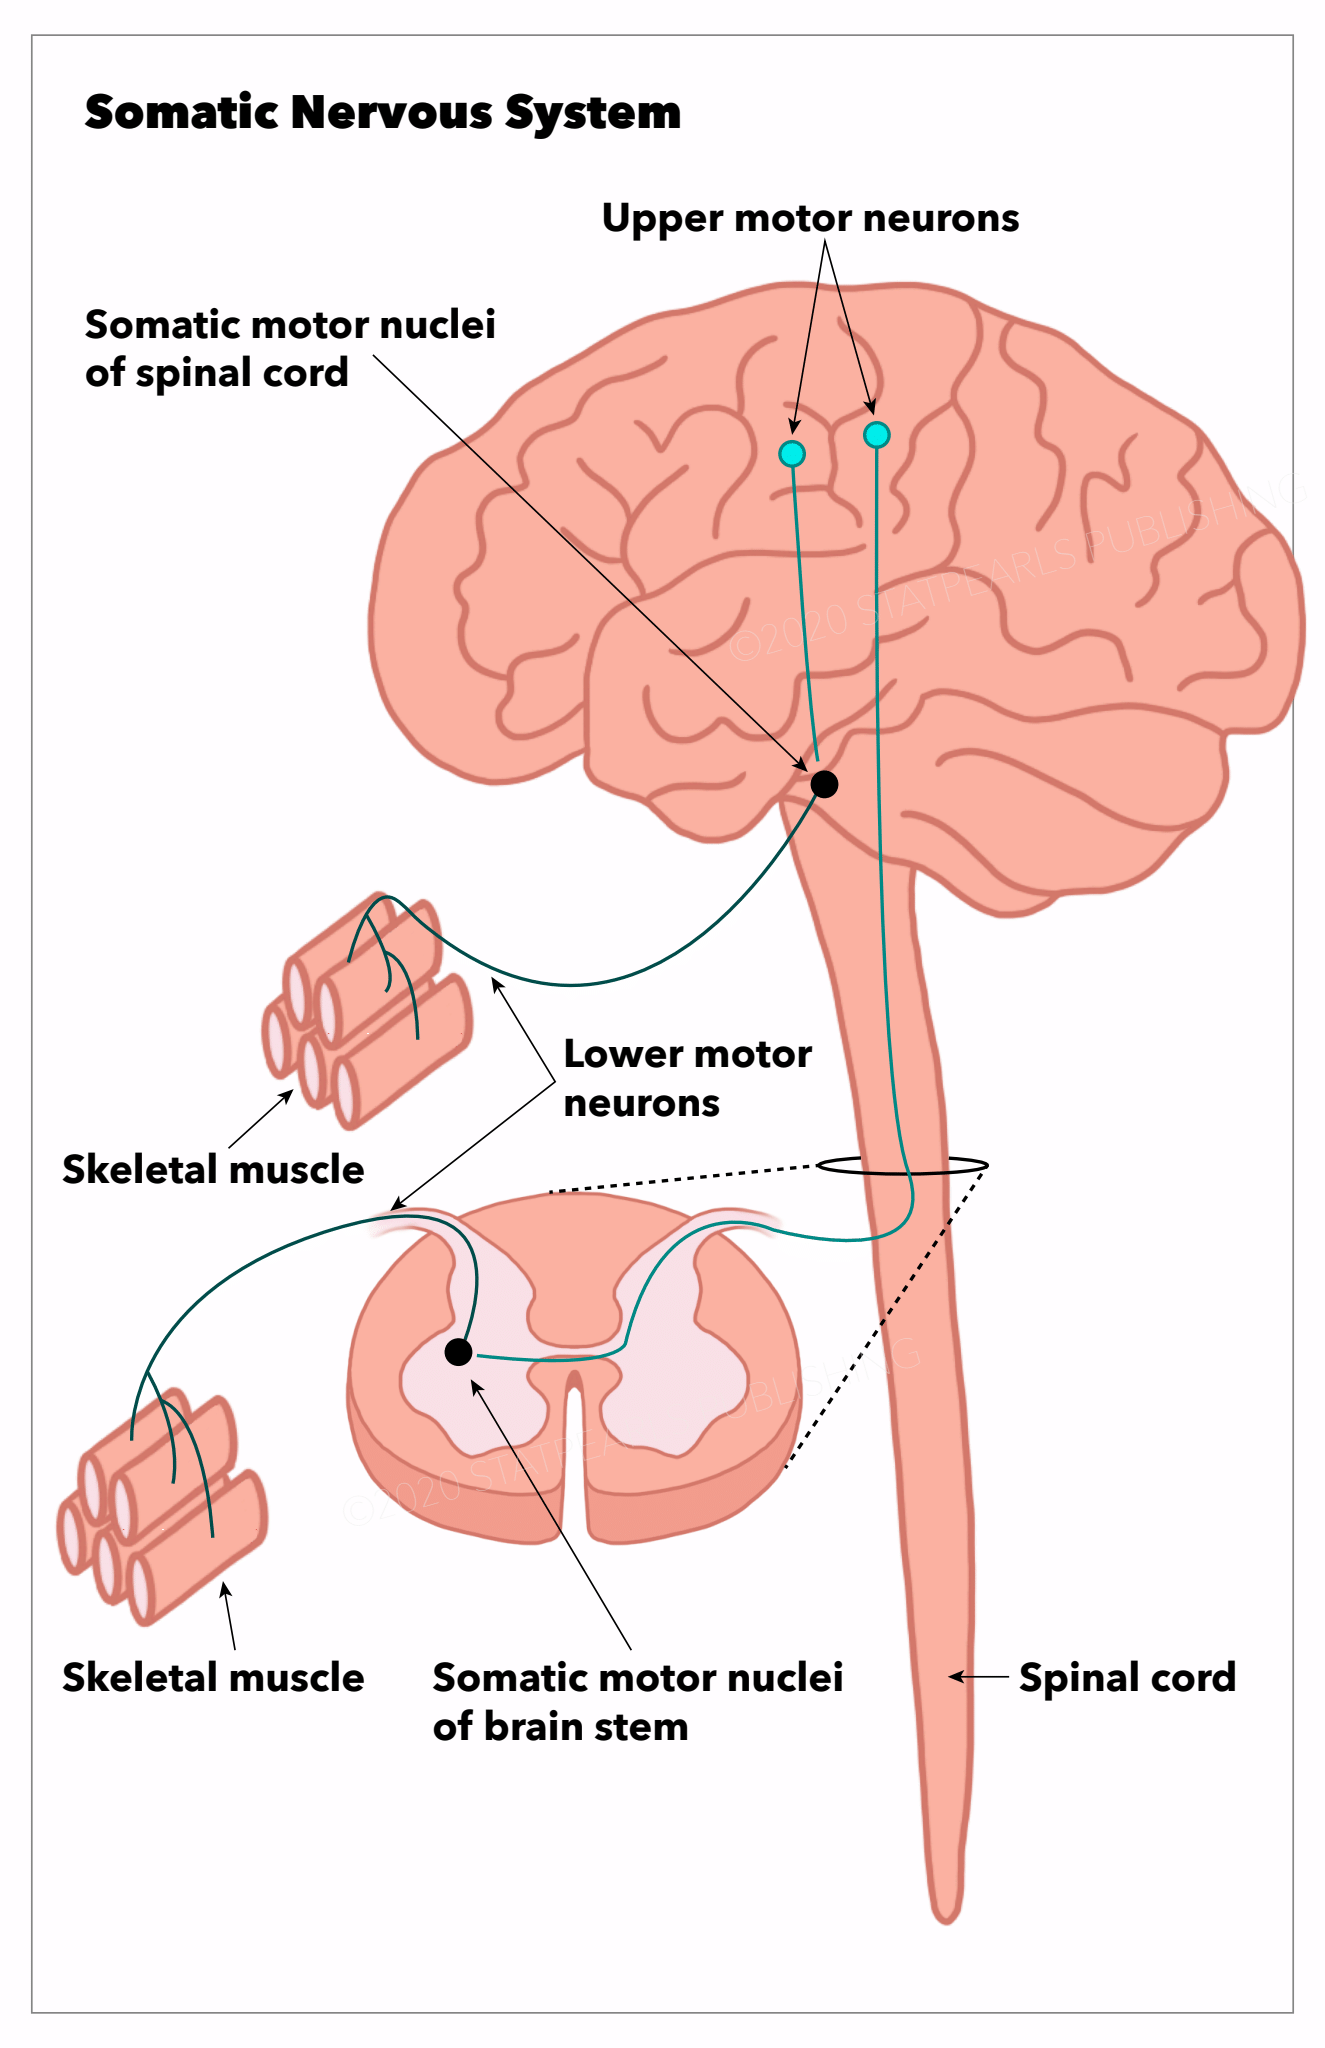 Somatic Nervous System, spinal cord, neurons